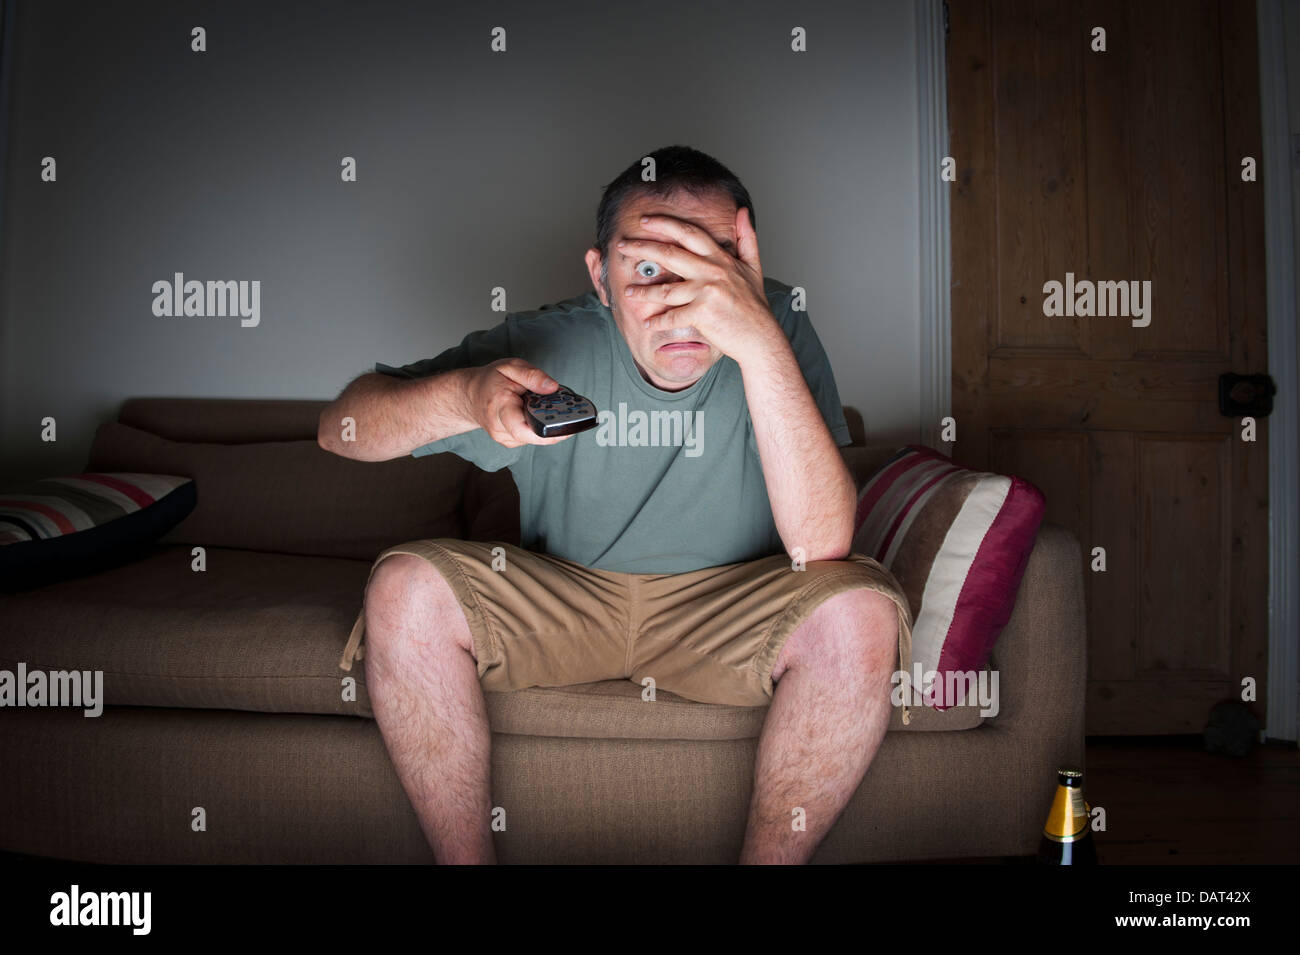 man covering his eyes watching tv or television Stock Photo